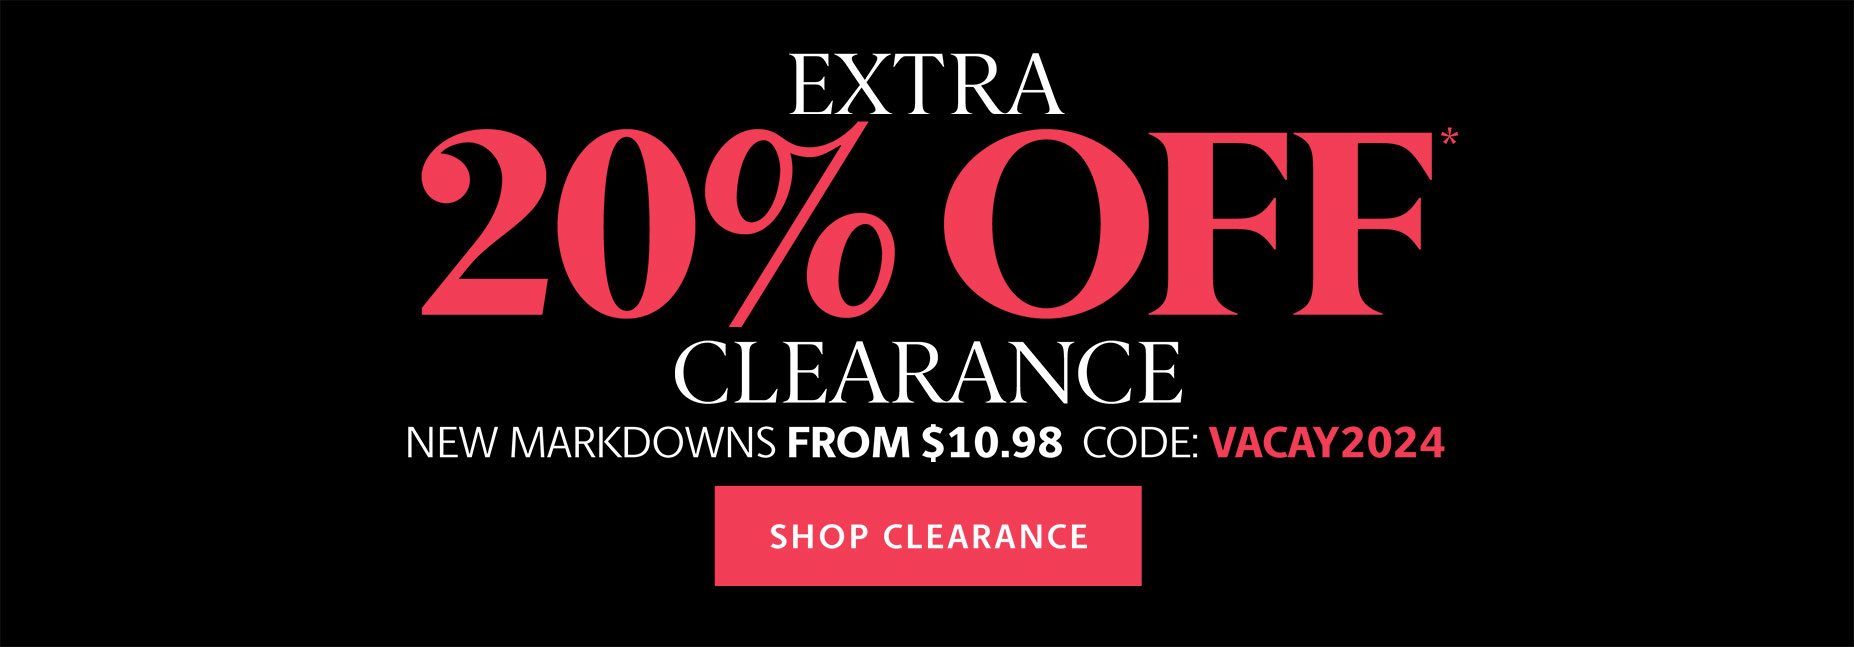 Clearance extra 20% Off